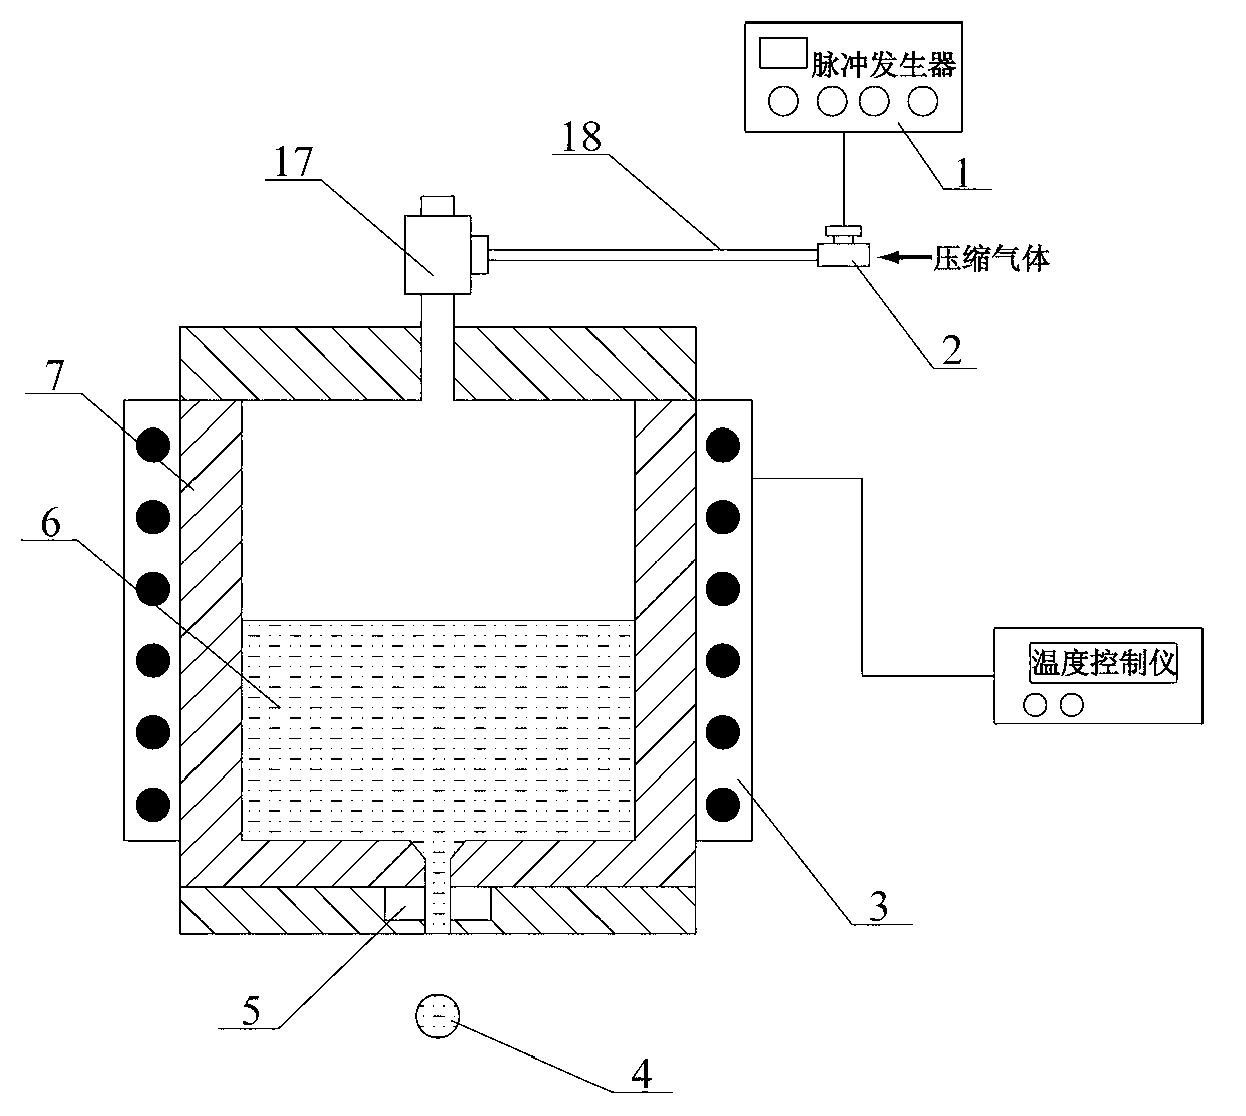 Molten metal droplet forming device and method of utilizing same to form molten metal droplets